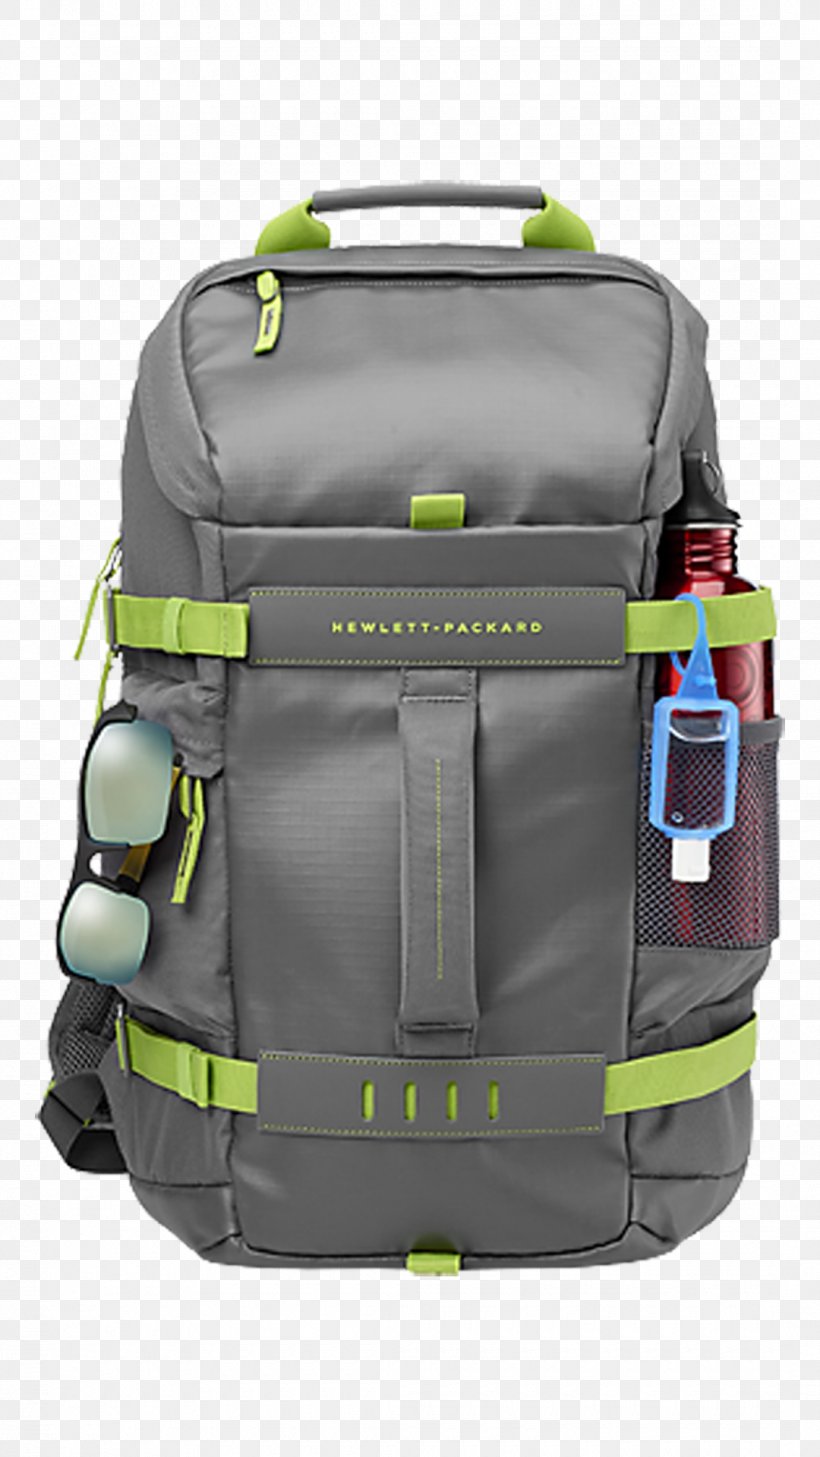 Laptop Dell HP Pavilion Hewlett-Packard Backpack, PNG, 1080x1920px, Laptop, Backpack, Bag, Computer, Dell Download Free